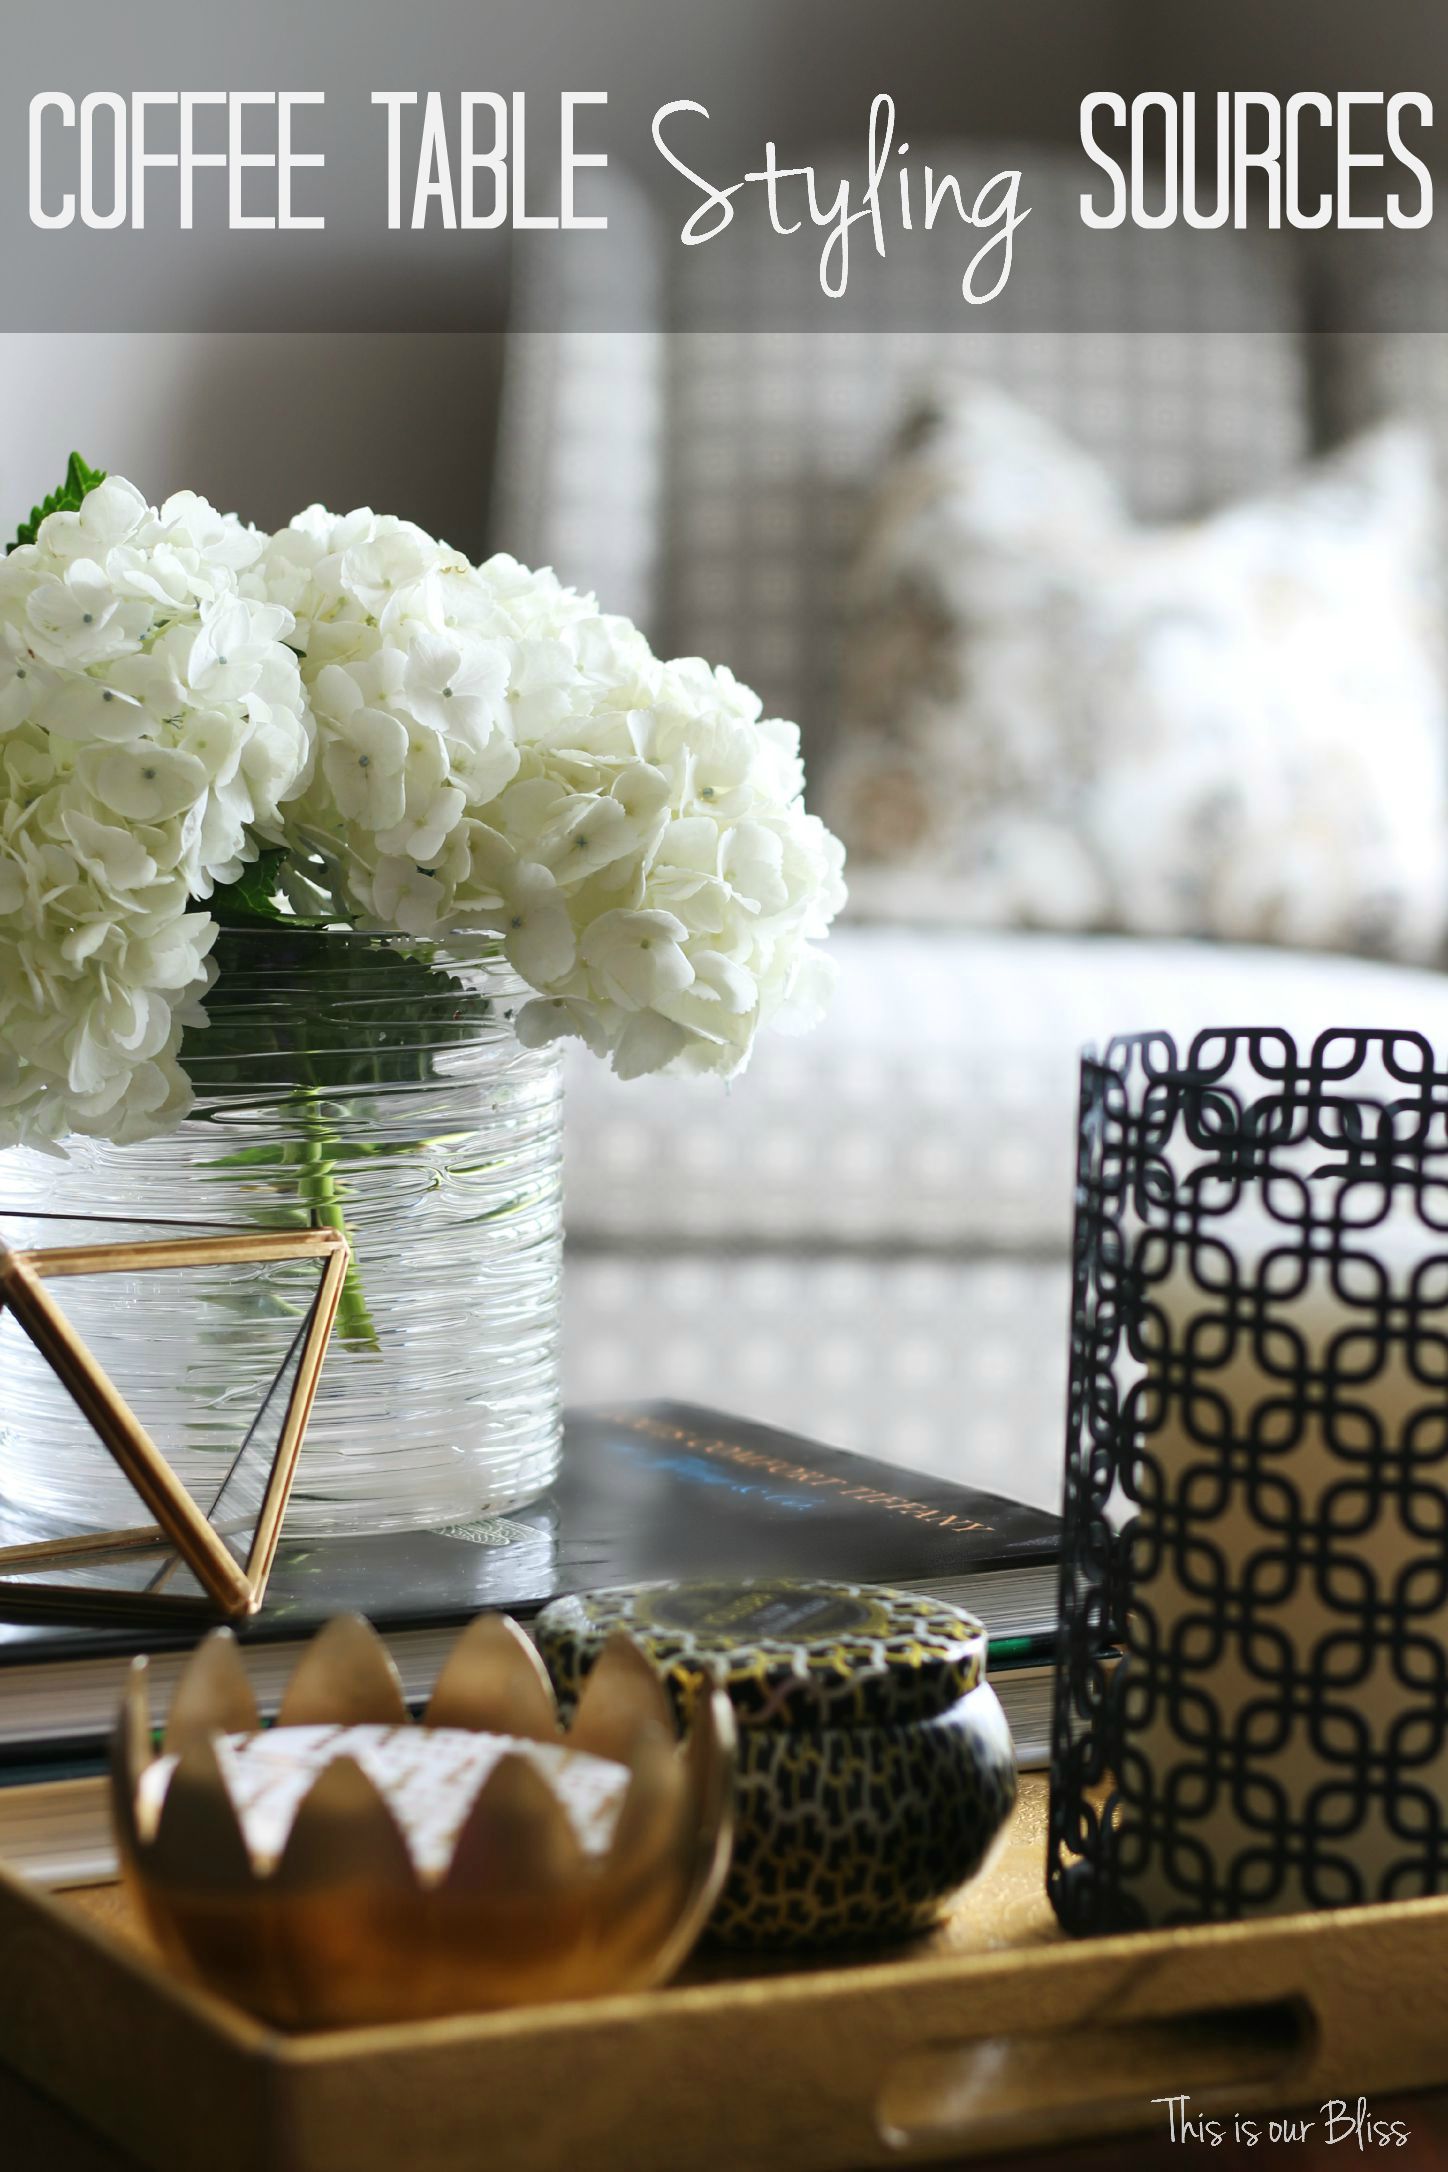 How to style a coffee table - sources - coffee table styling - elements of a well-styled coffee table - Back to Basics - This is our Bliss